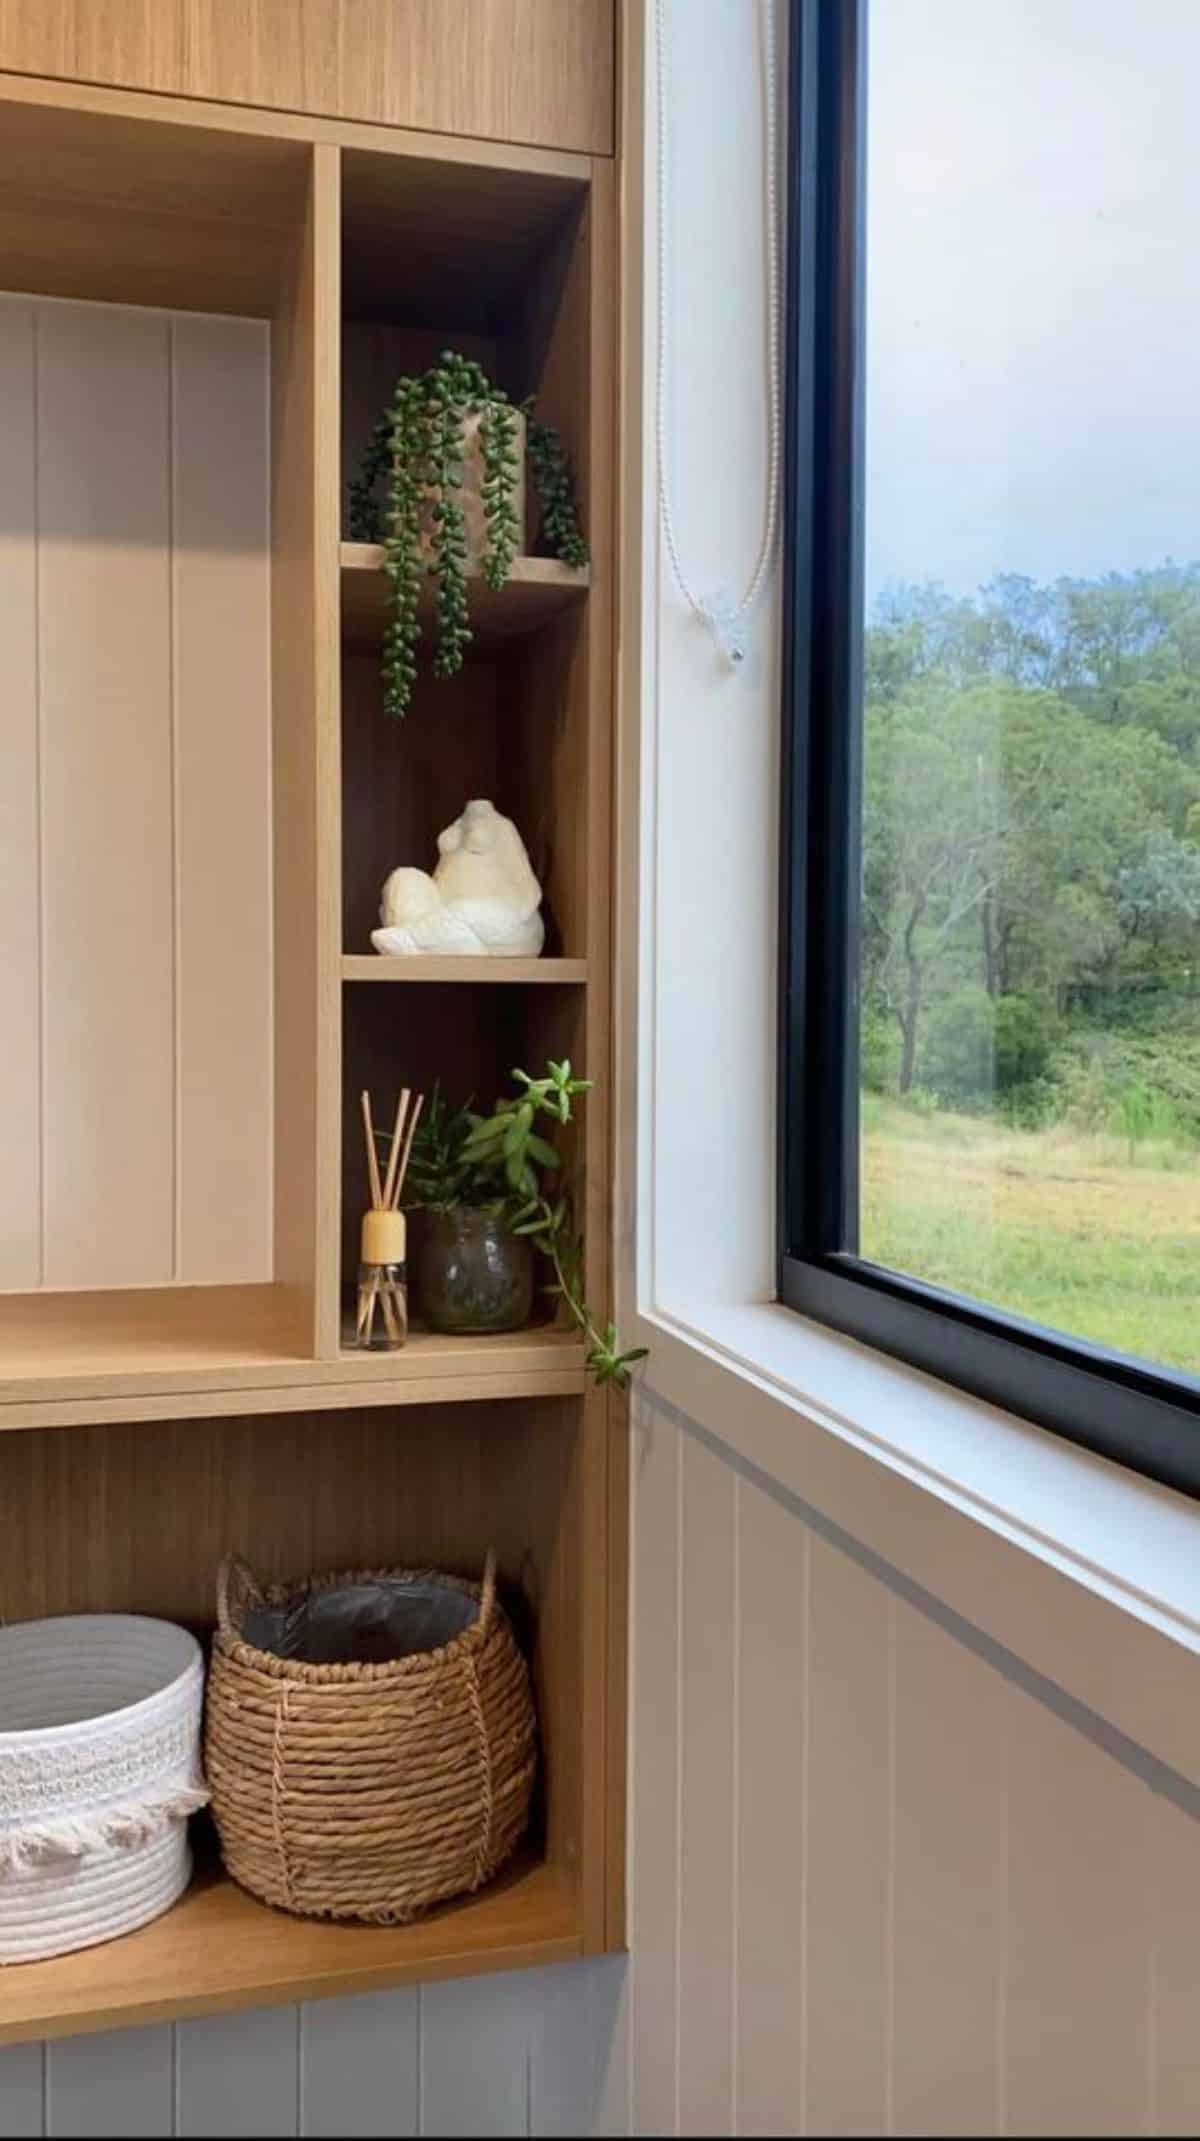 Storage cabinets of sustainable tiny home